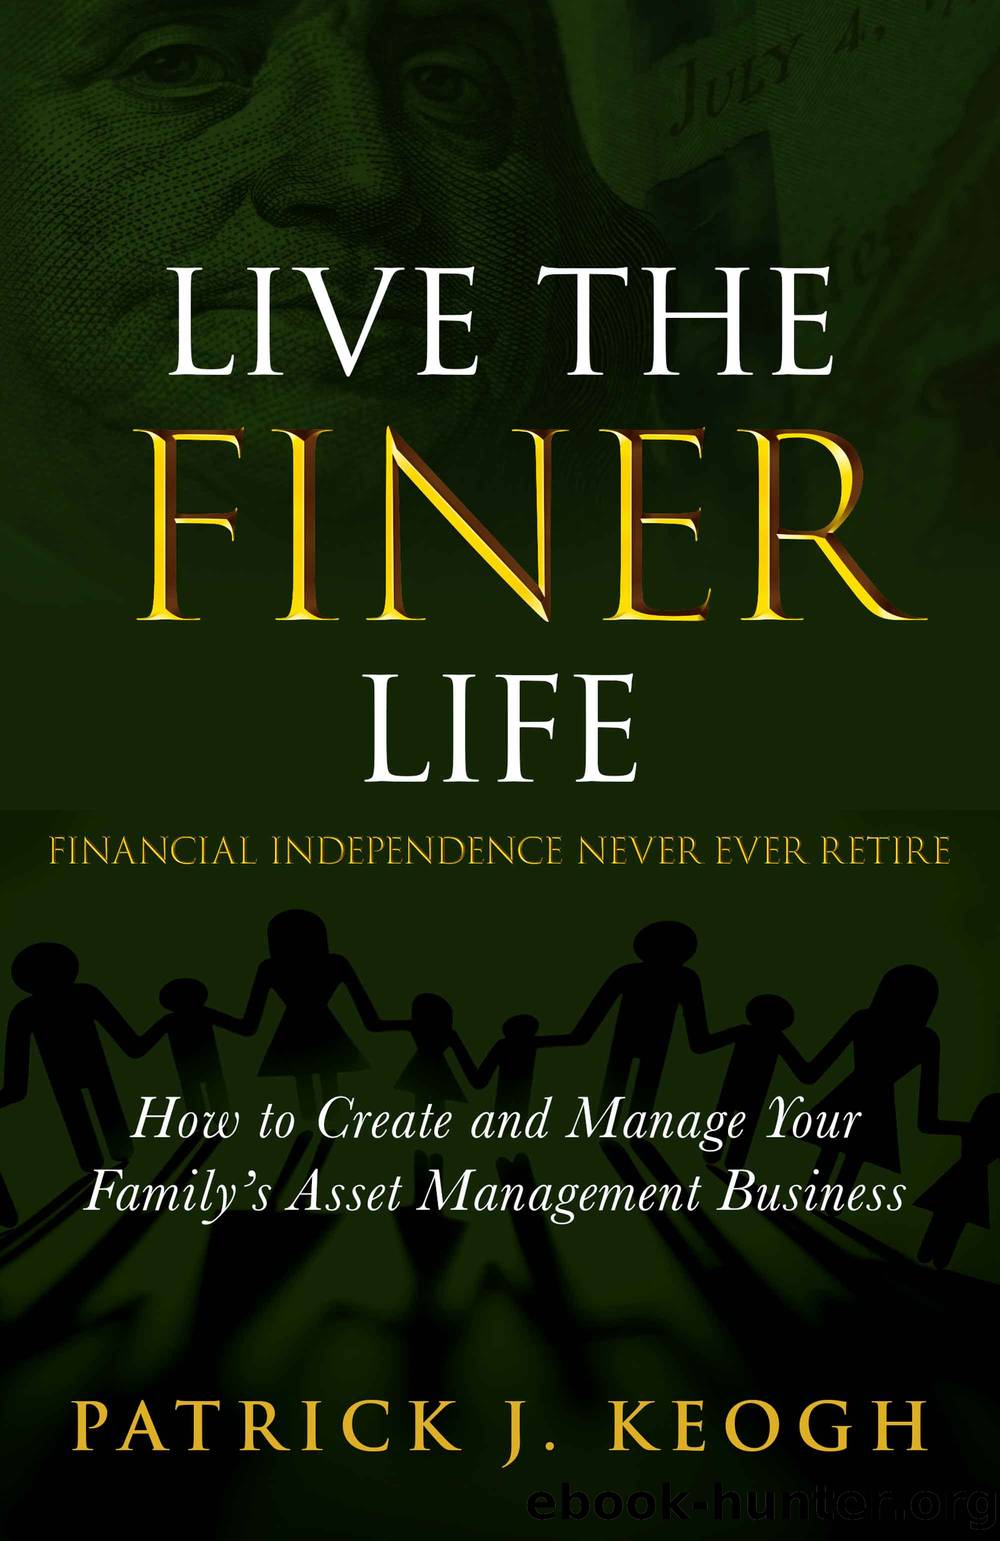 Live the FINER Life (Financial Independence Never Ever Retire) by Patrick J Keogh